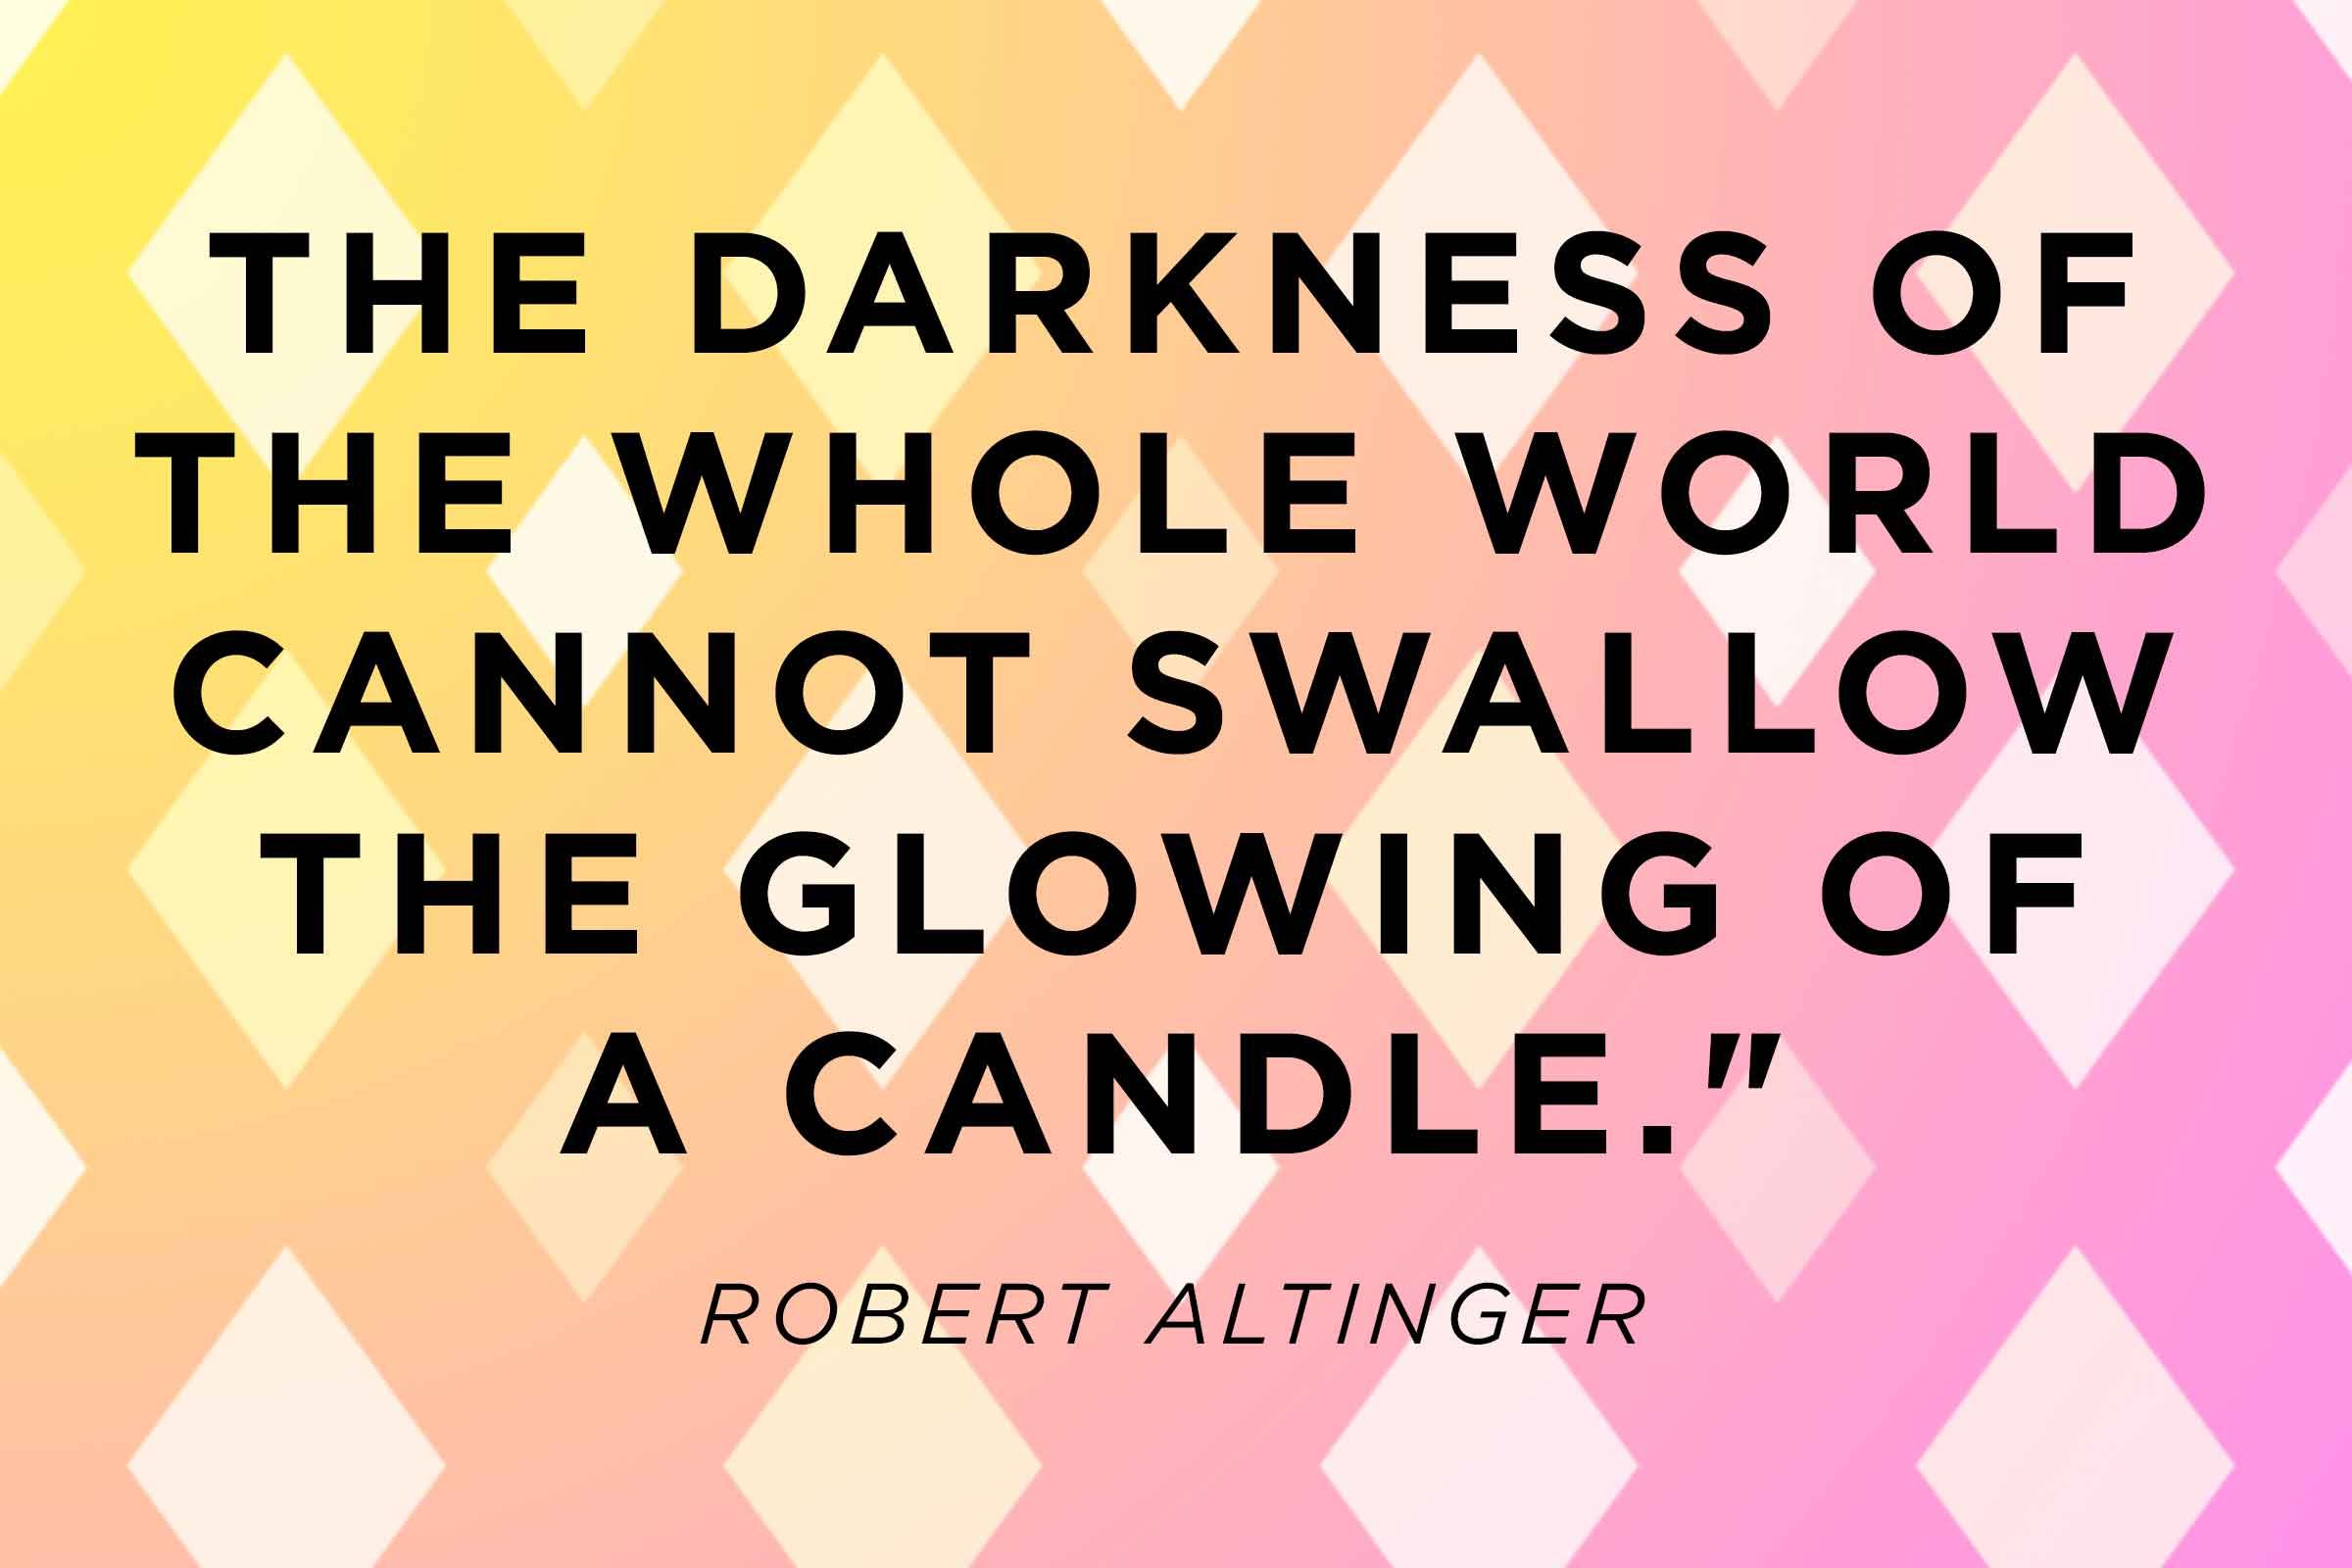 Be the candle